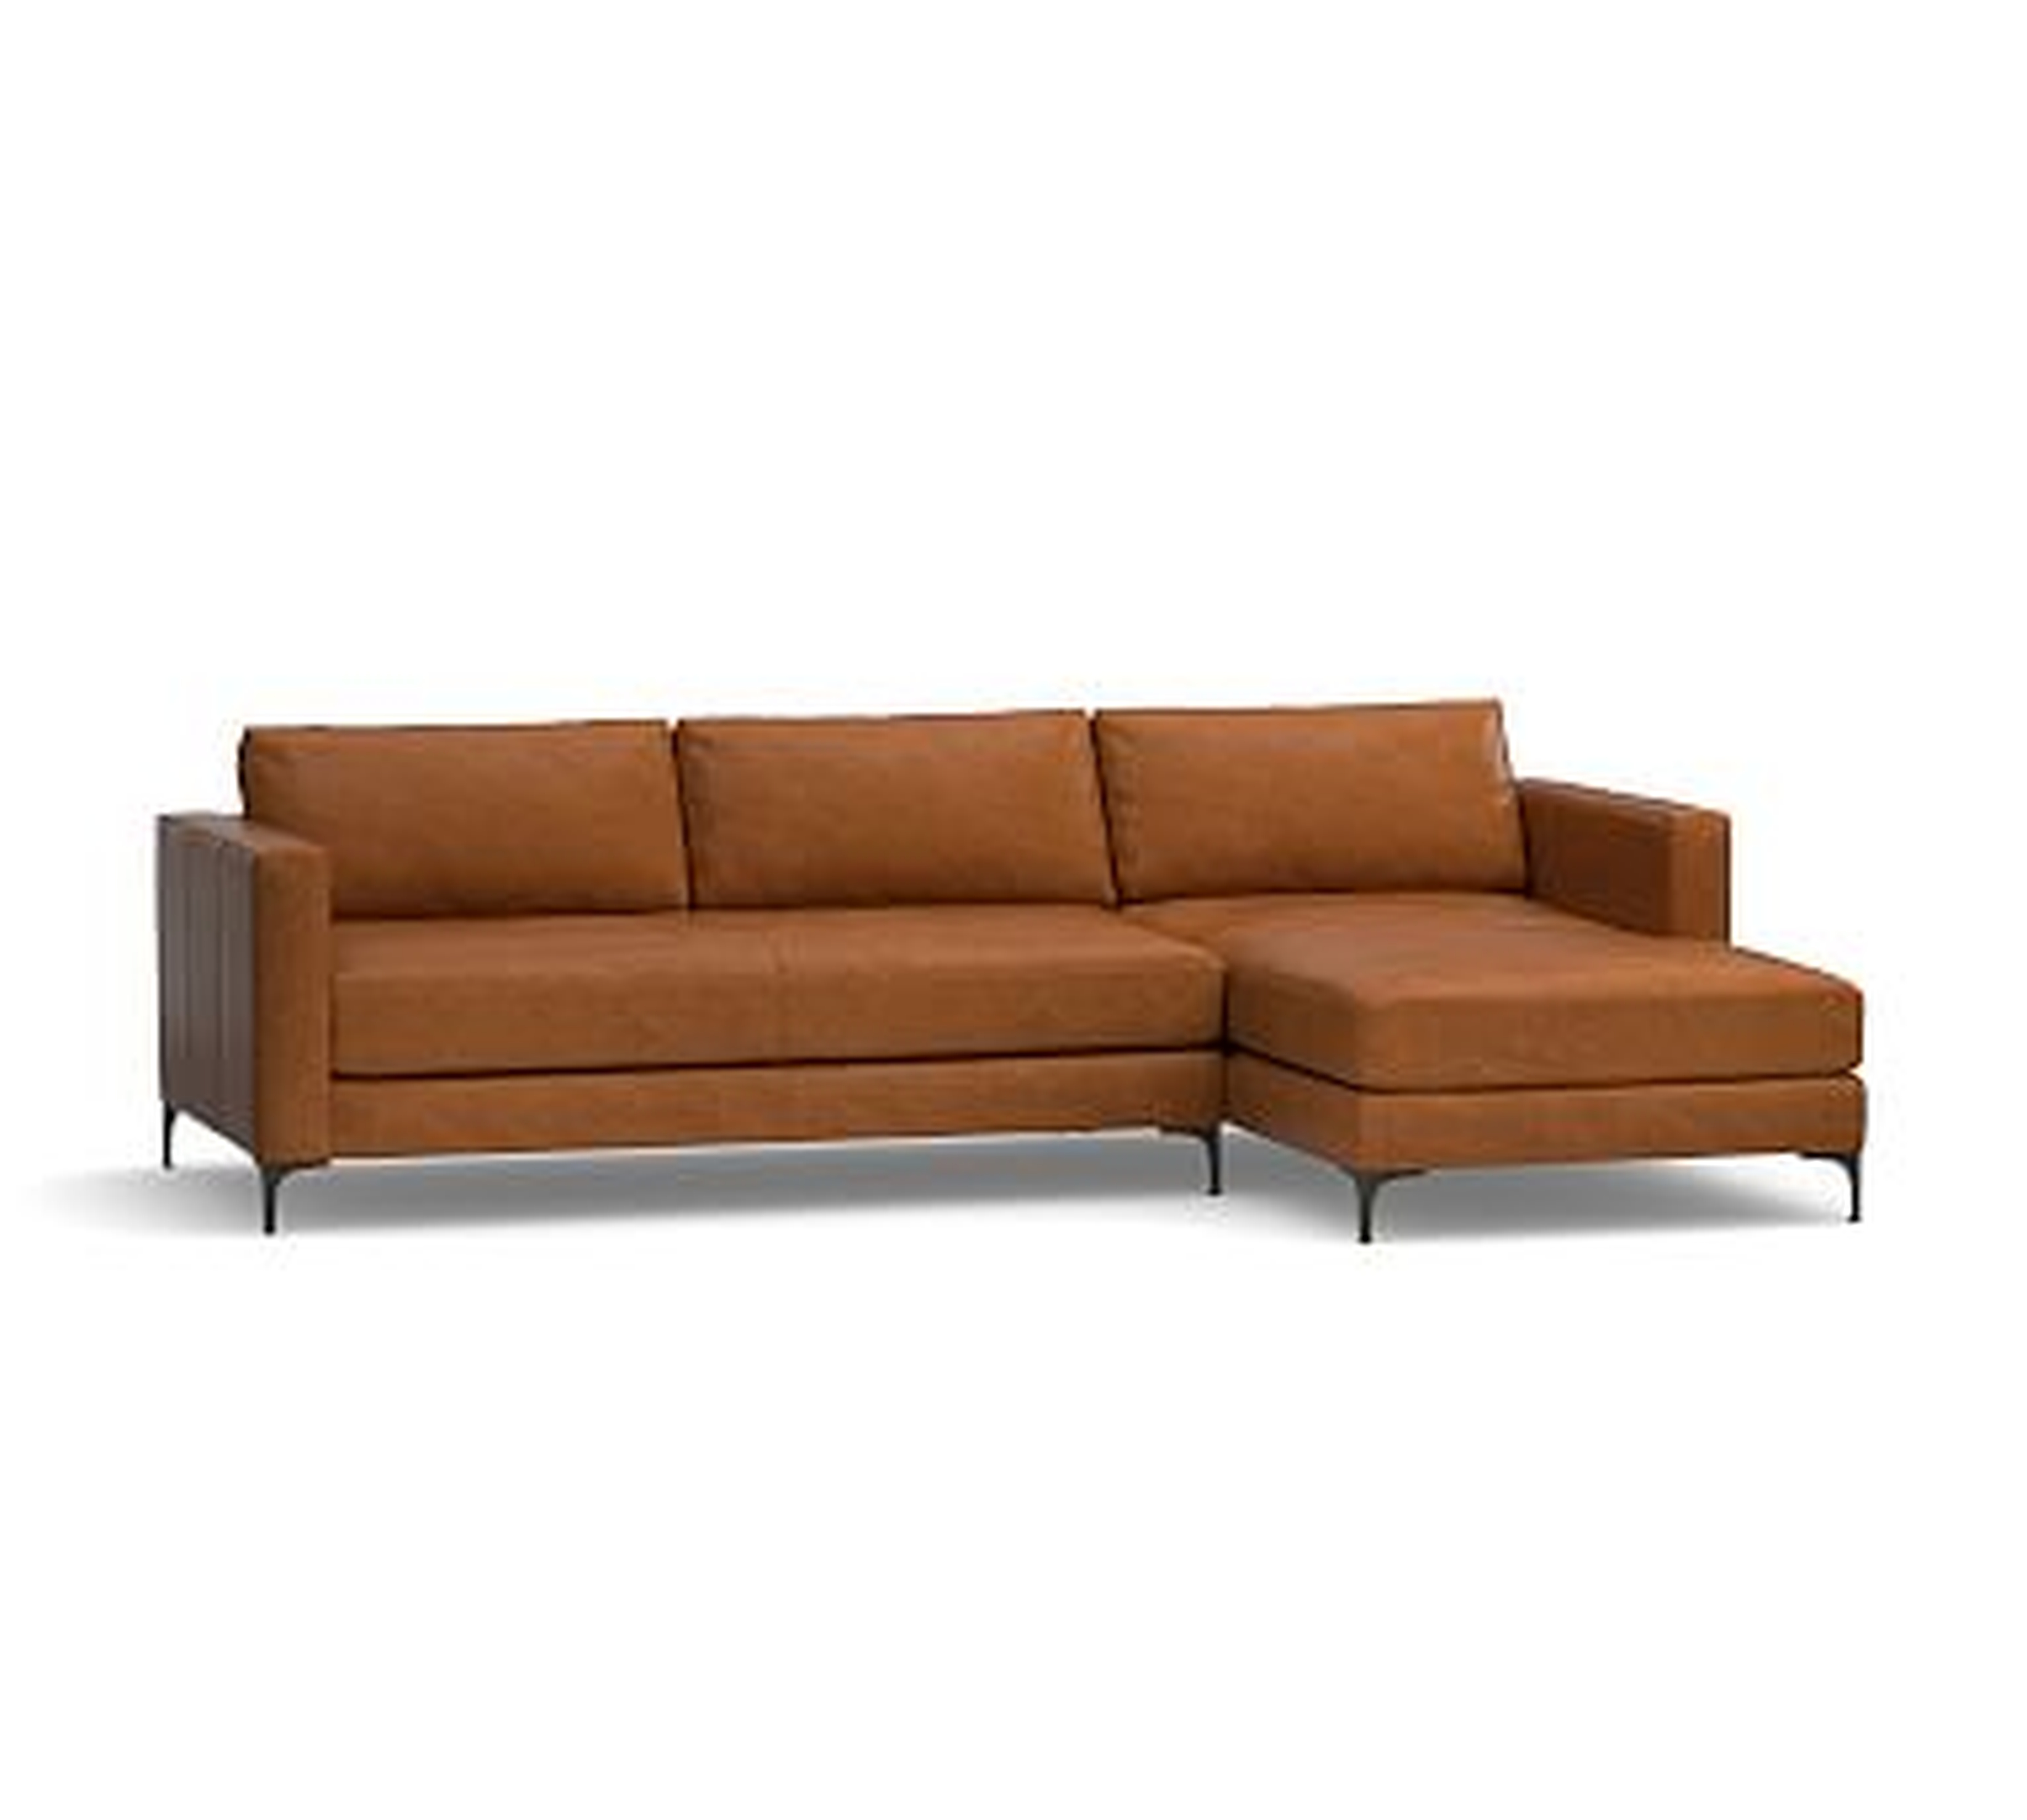 Jake Leather Left Arm Loveseat with Chaise Sectional, Bench Cushion and Bronze Legs, Down Blend Wrapped Cushions, Vintage Caramel - Pottery Barn